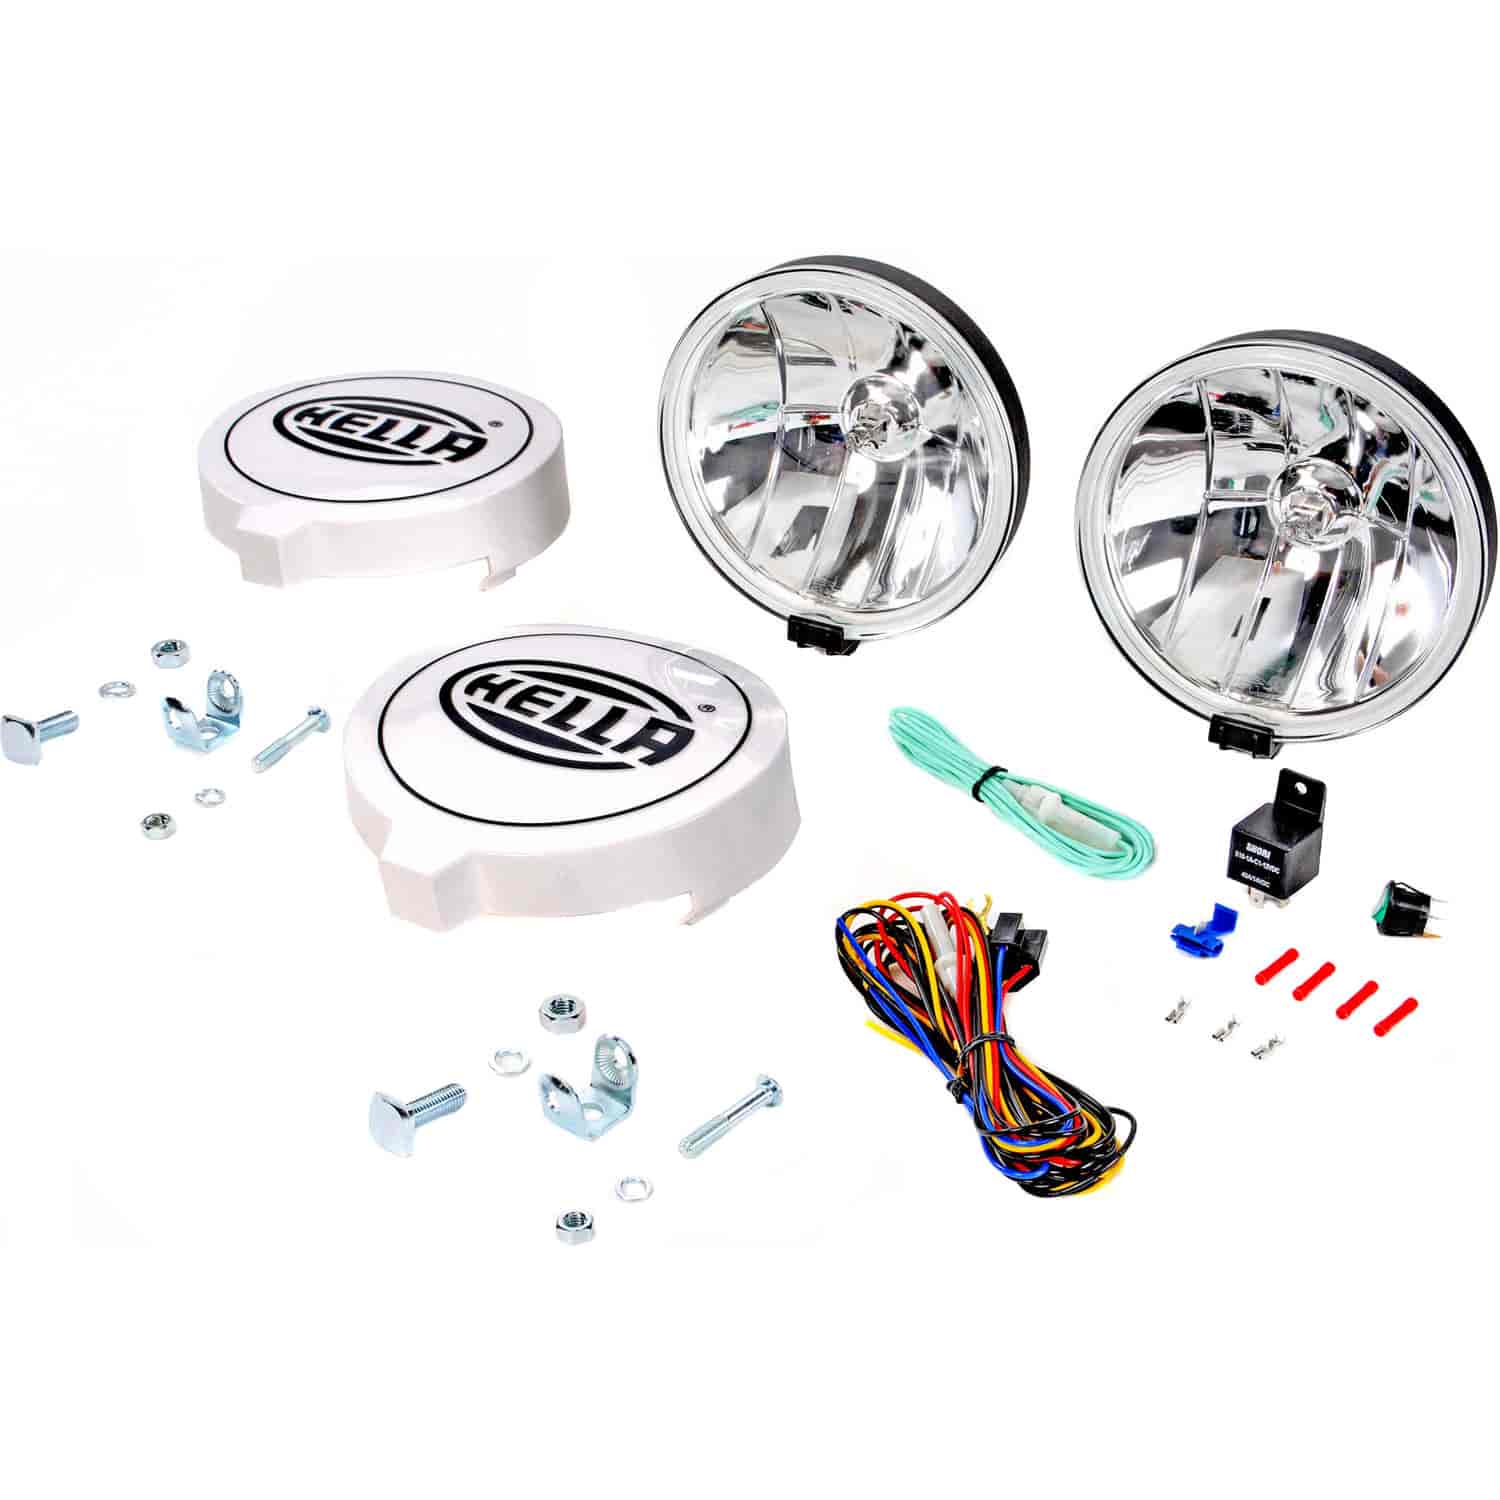 700FF Driving Light Kit Includes 2 Halogen Driving Lamps